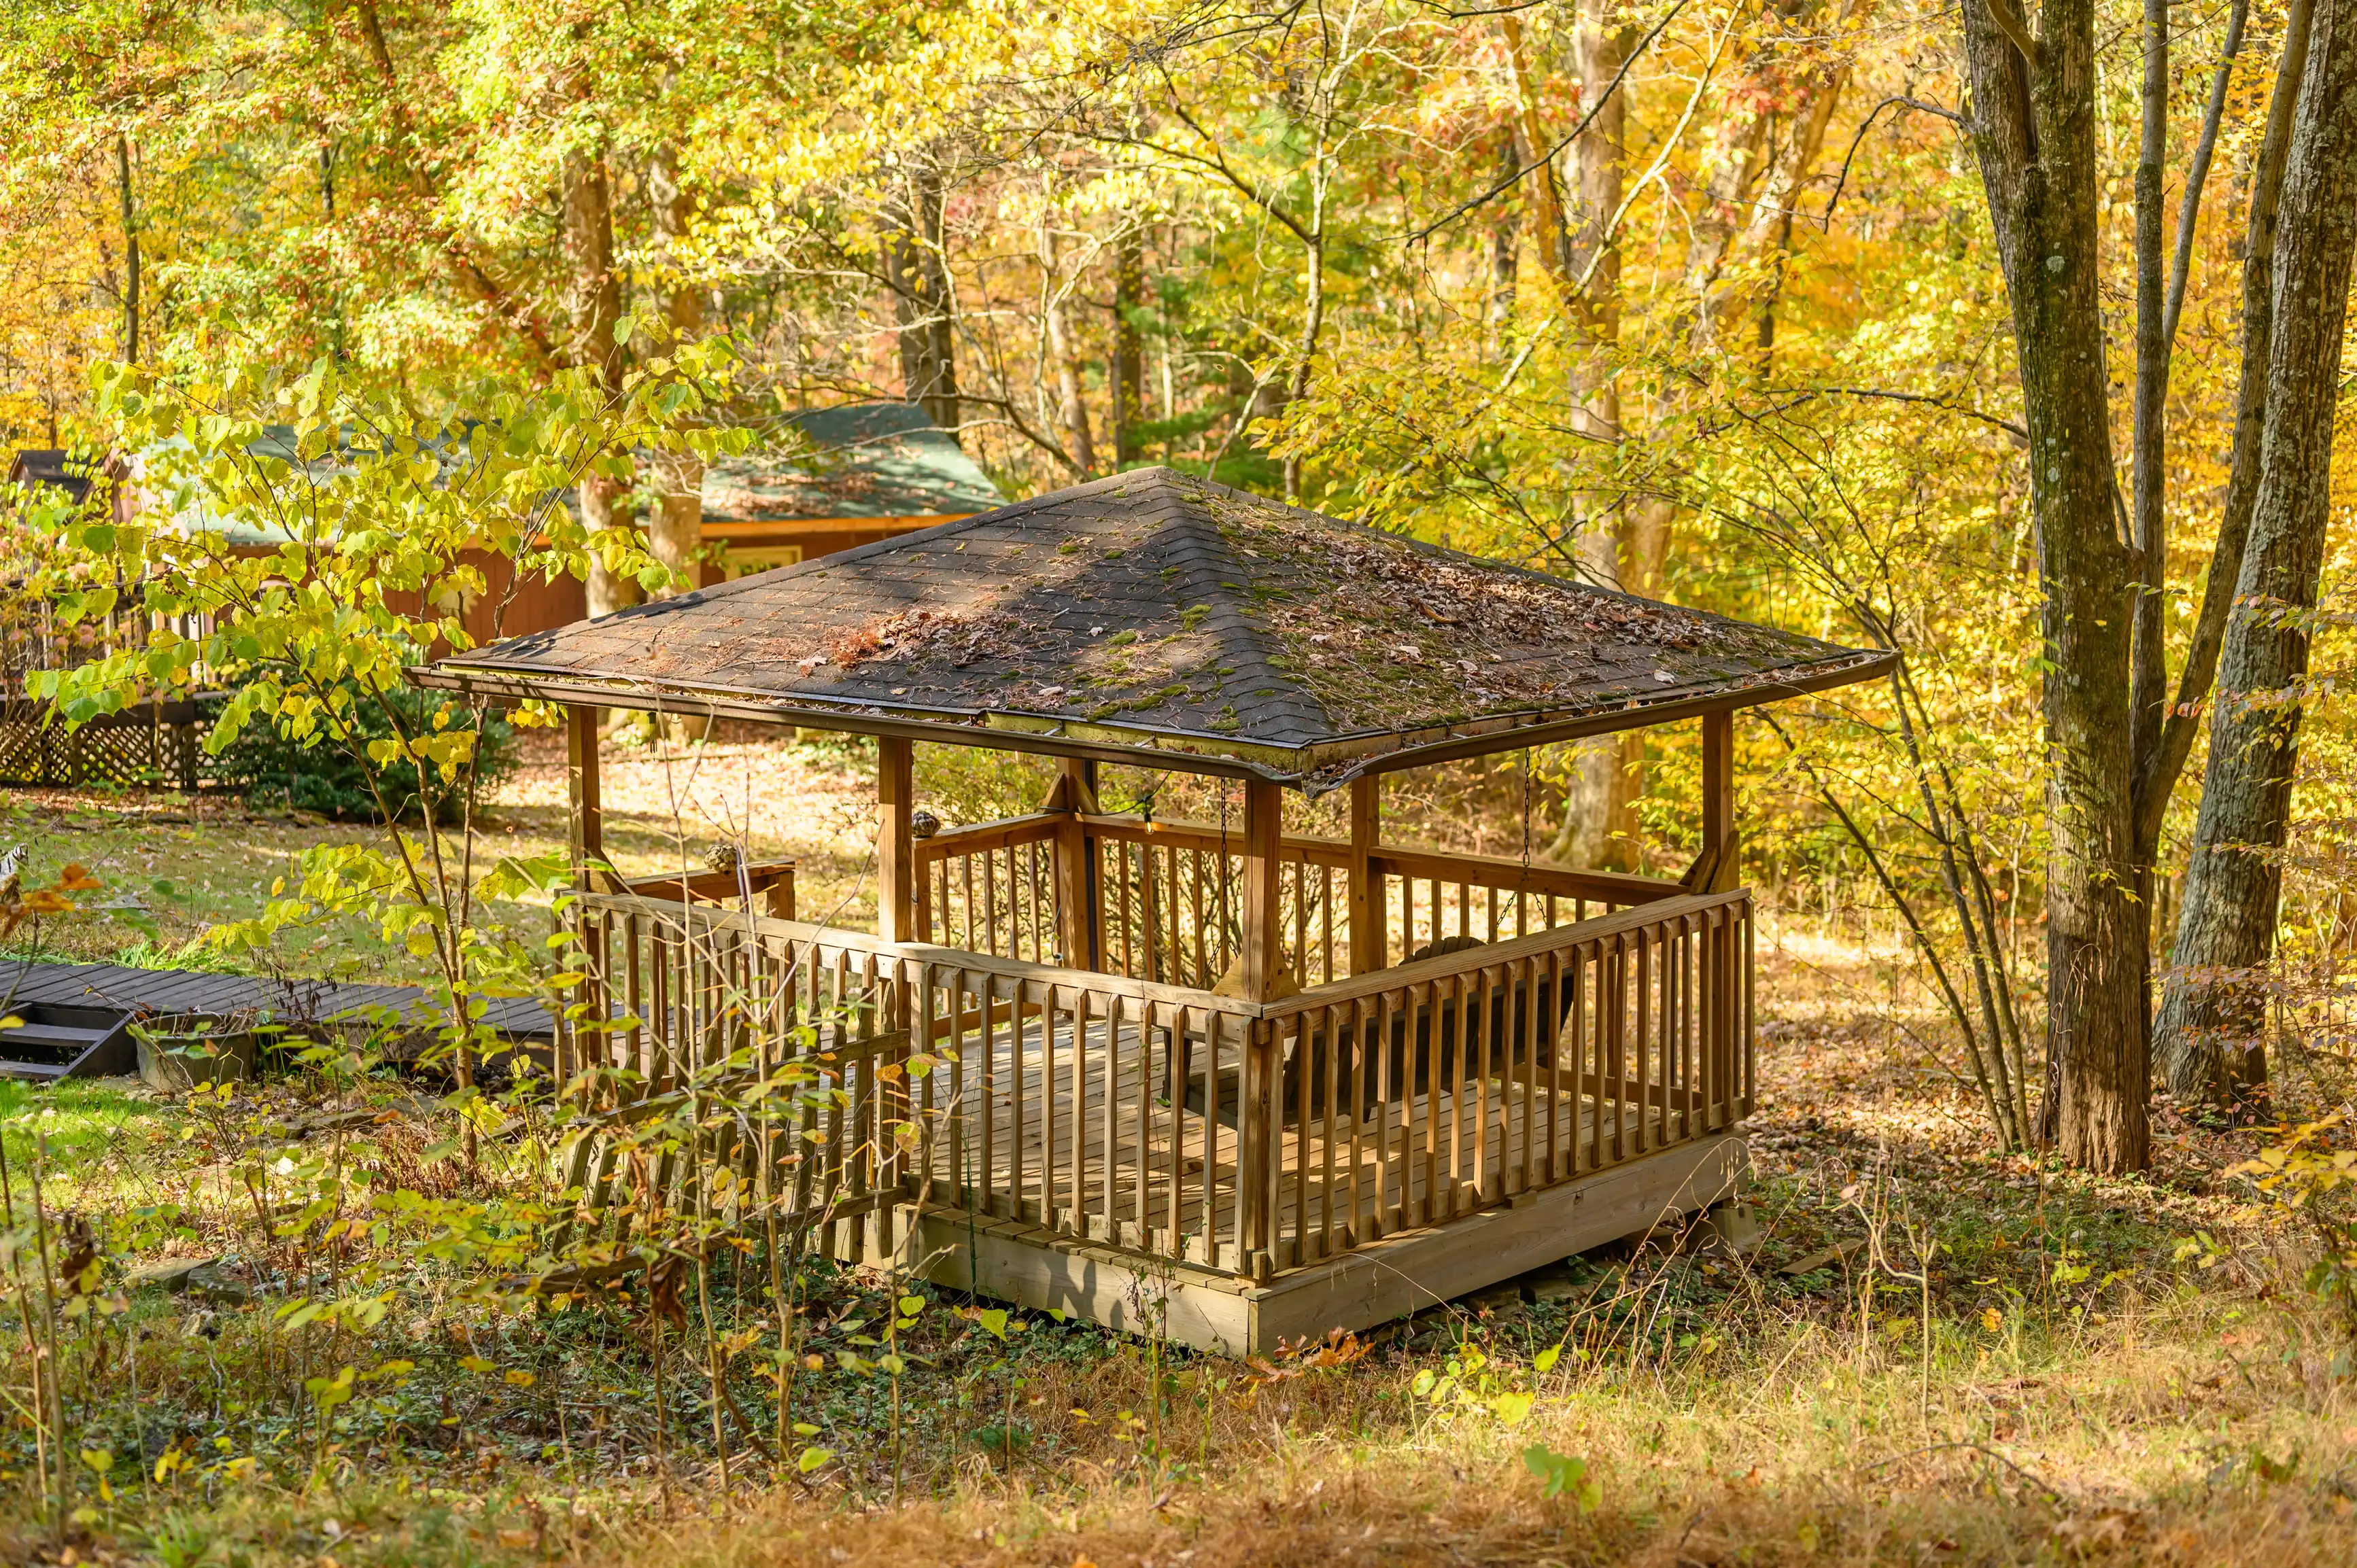 Wooden gazebo surrounded by autumnal trees in a forest setting.